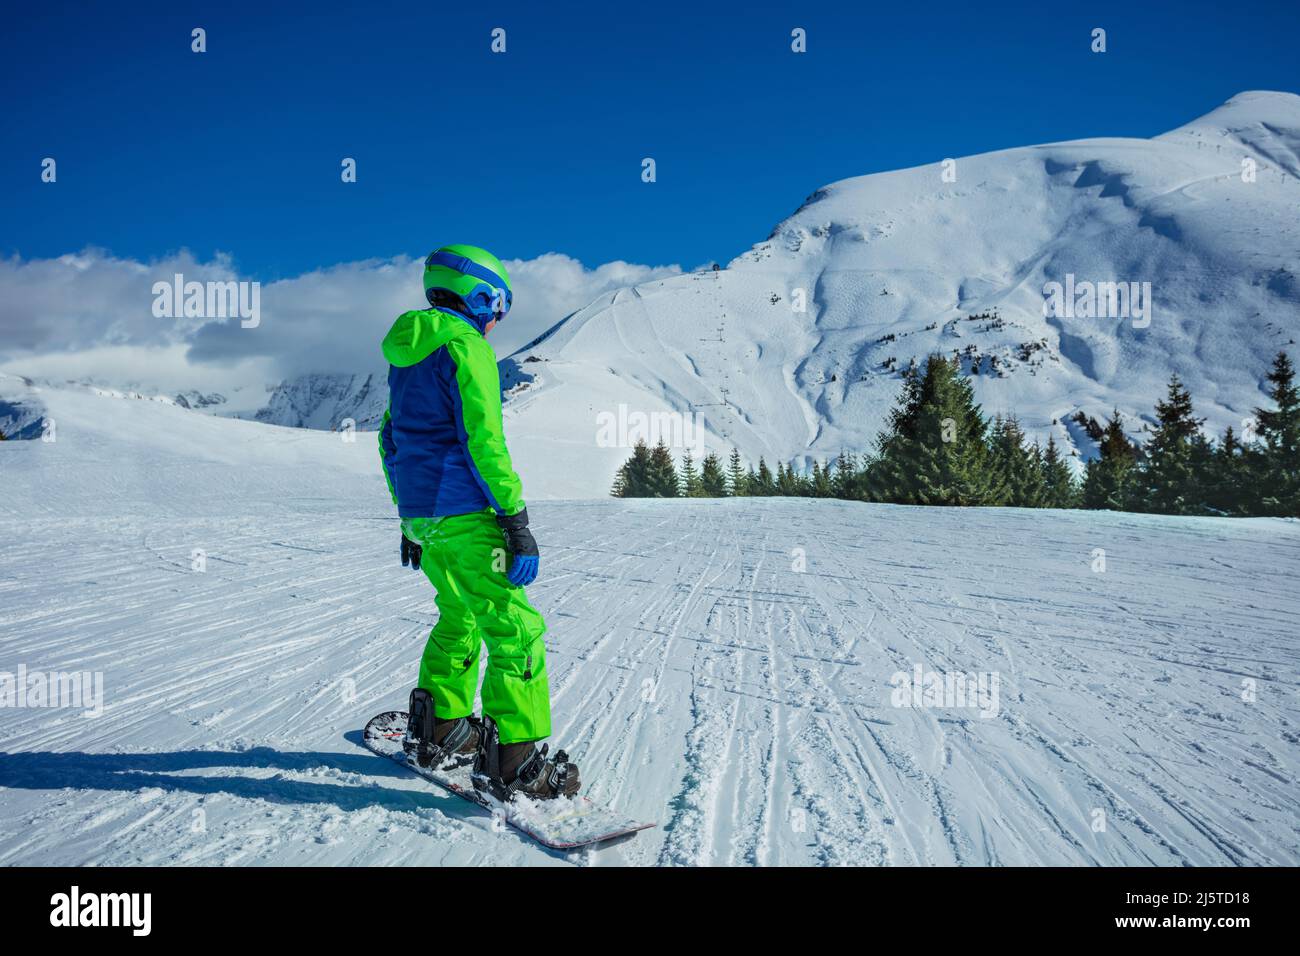 Boy ride snowboard with winter sport outfit on mountain top Stock Photo